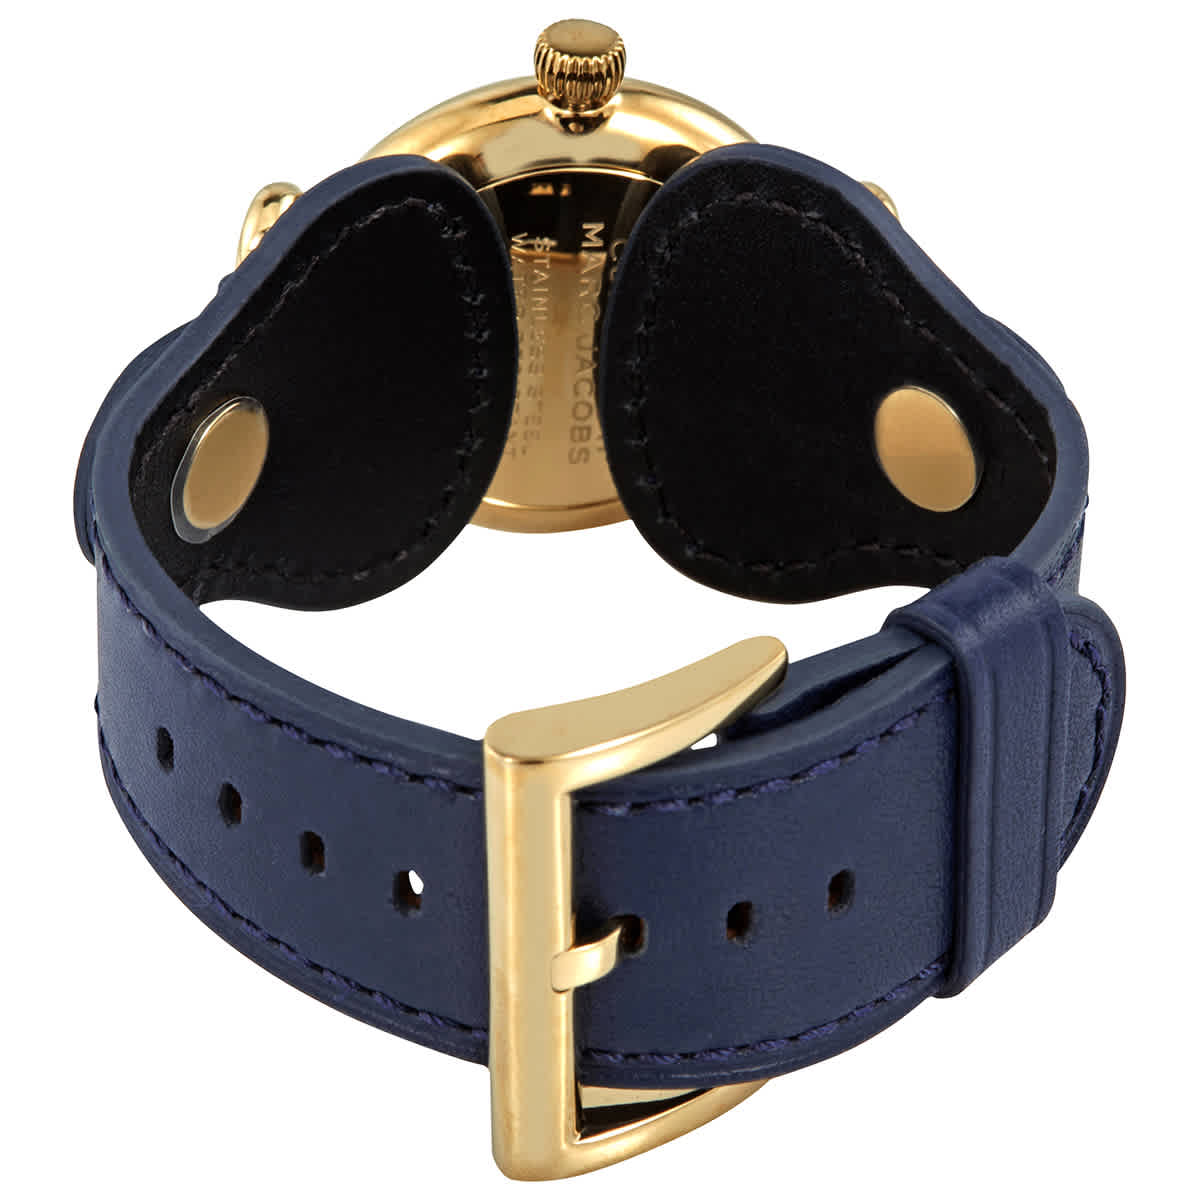 Romean - Gold Haute Couture Dog Collar - by Marc Petite